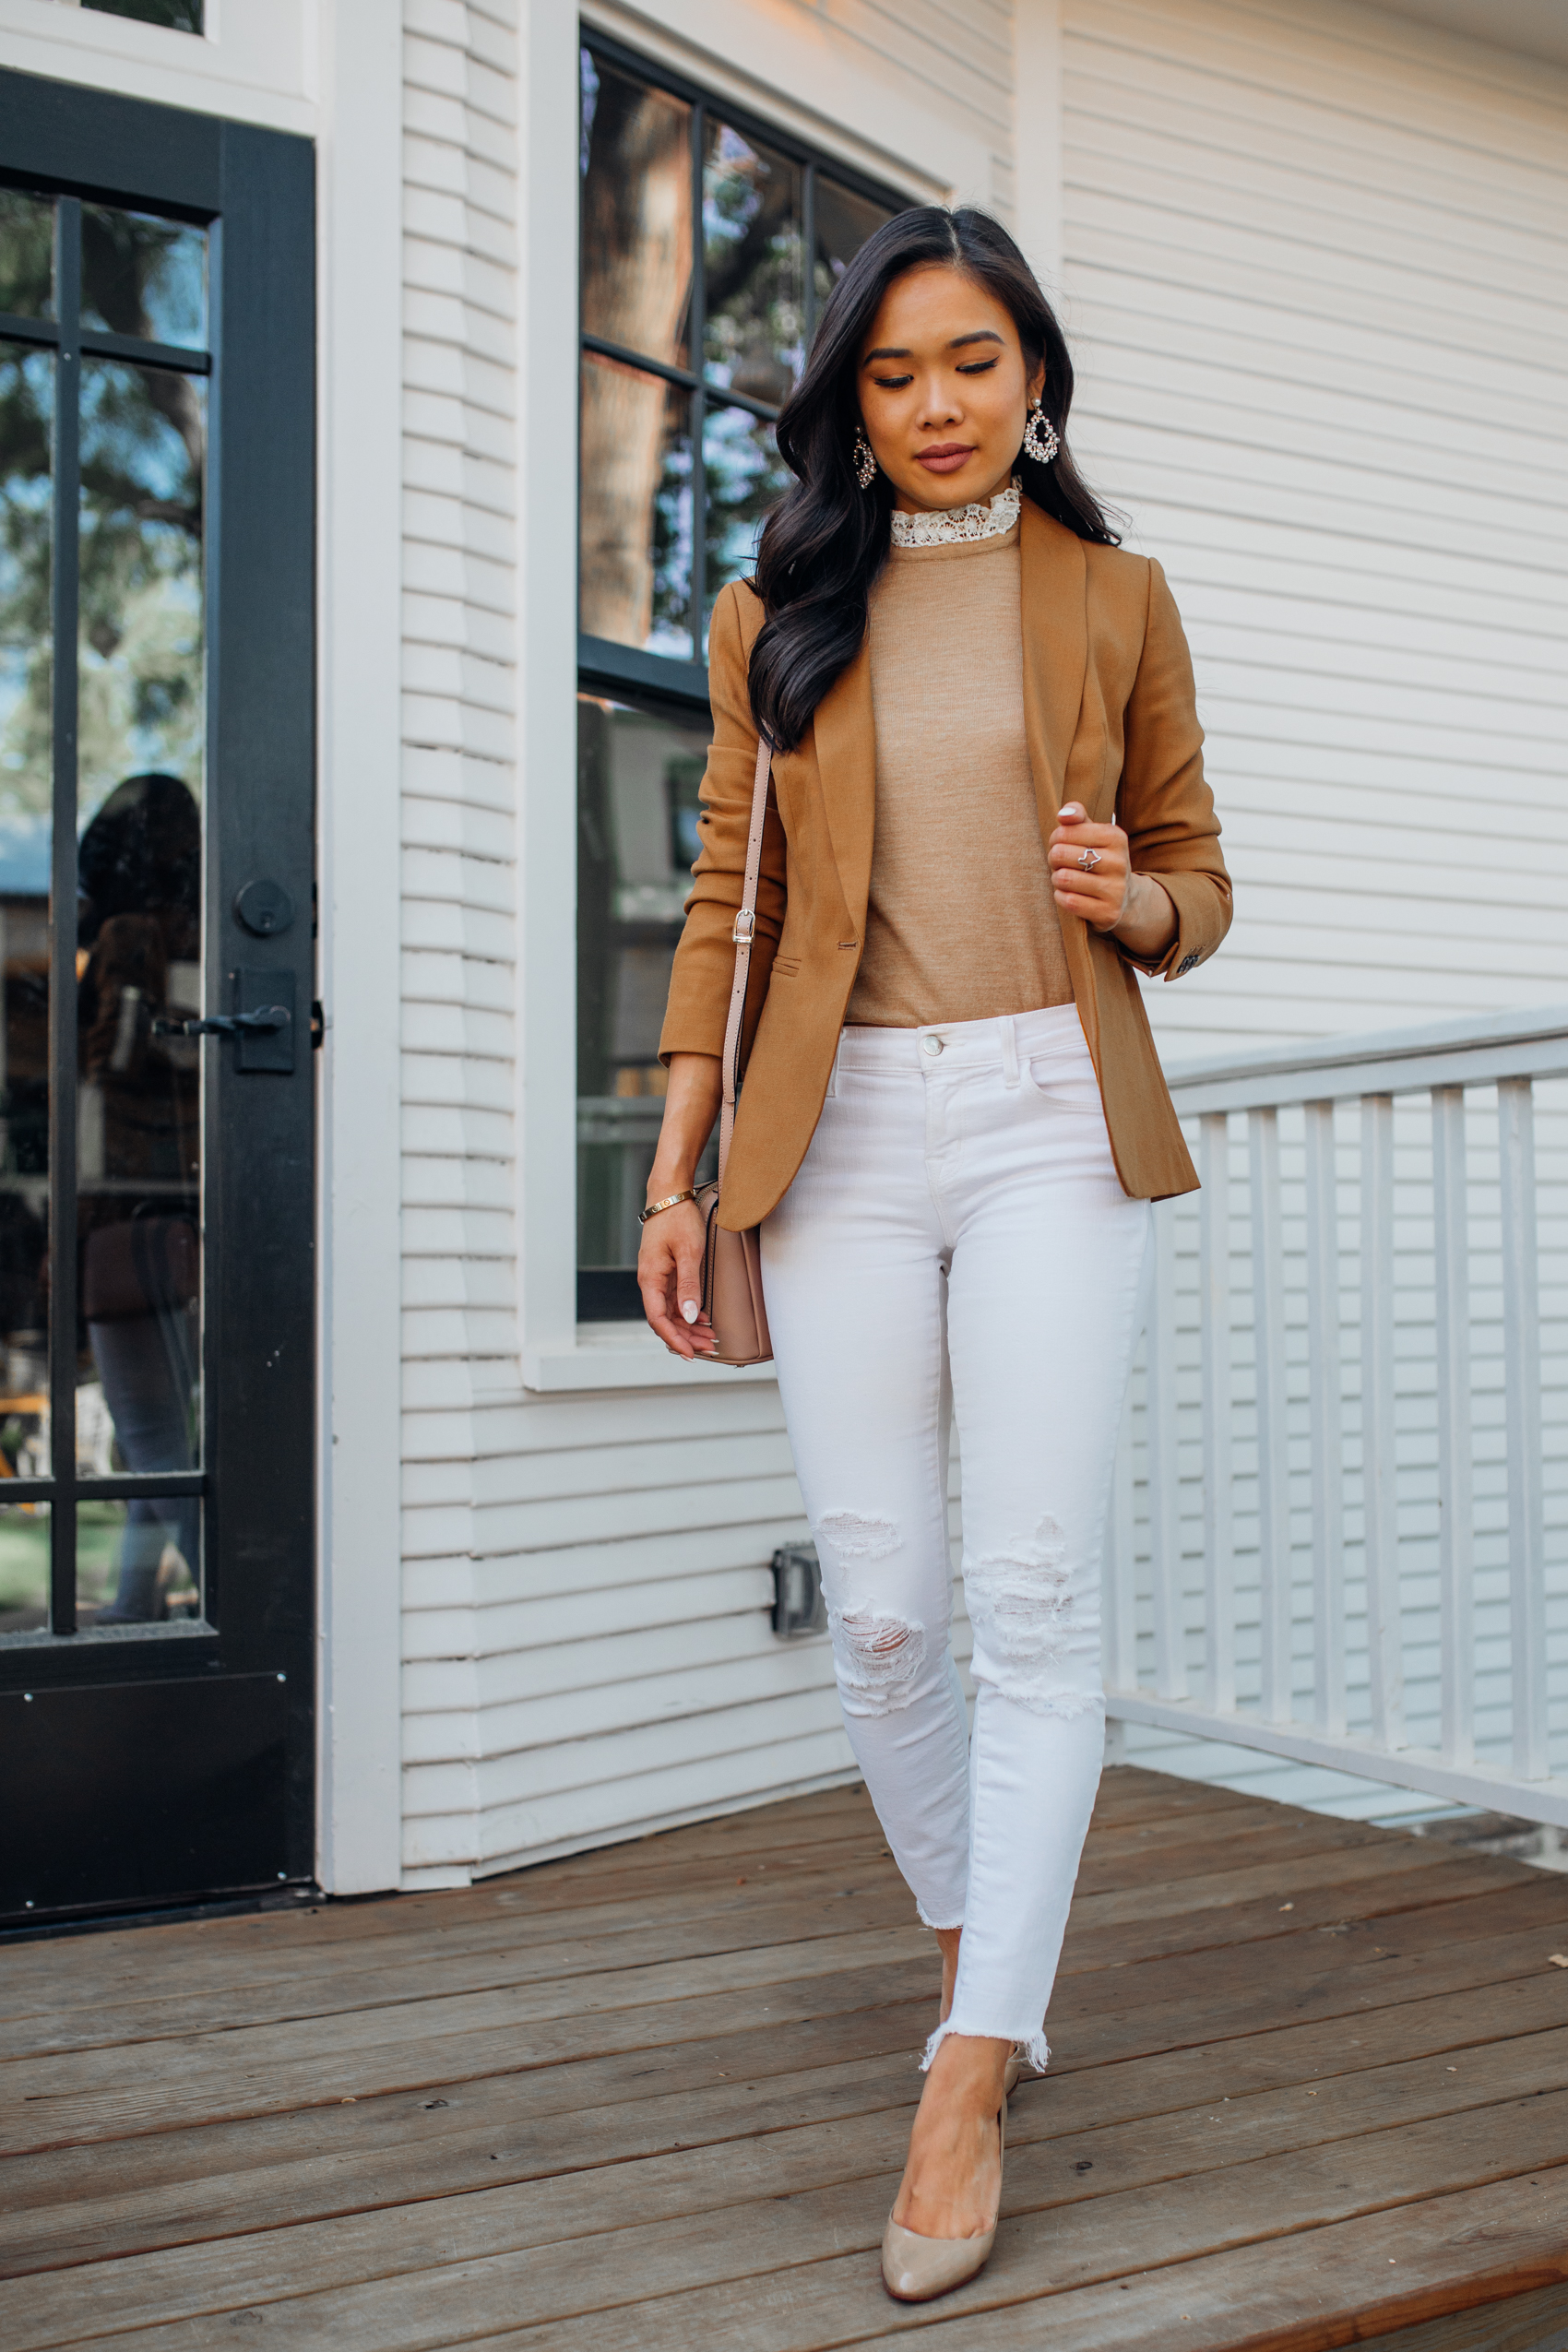 Blogger Hoang-Kim wears a brown blazer outfit with lace collar sweater, distressed white jeans and shares what to look for when buying a blazer